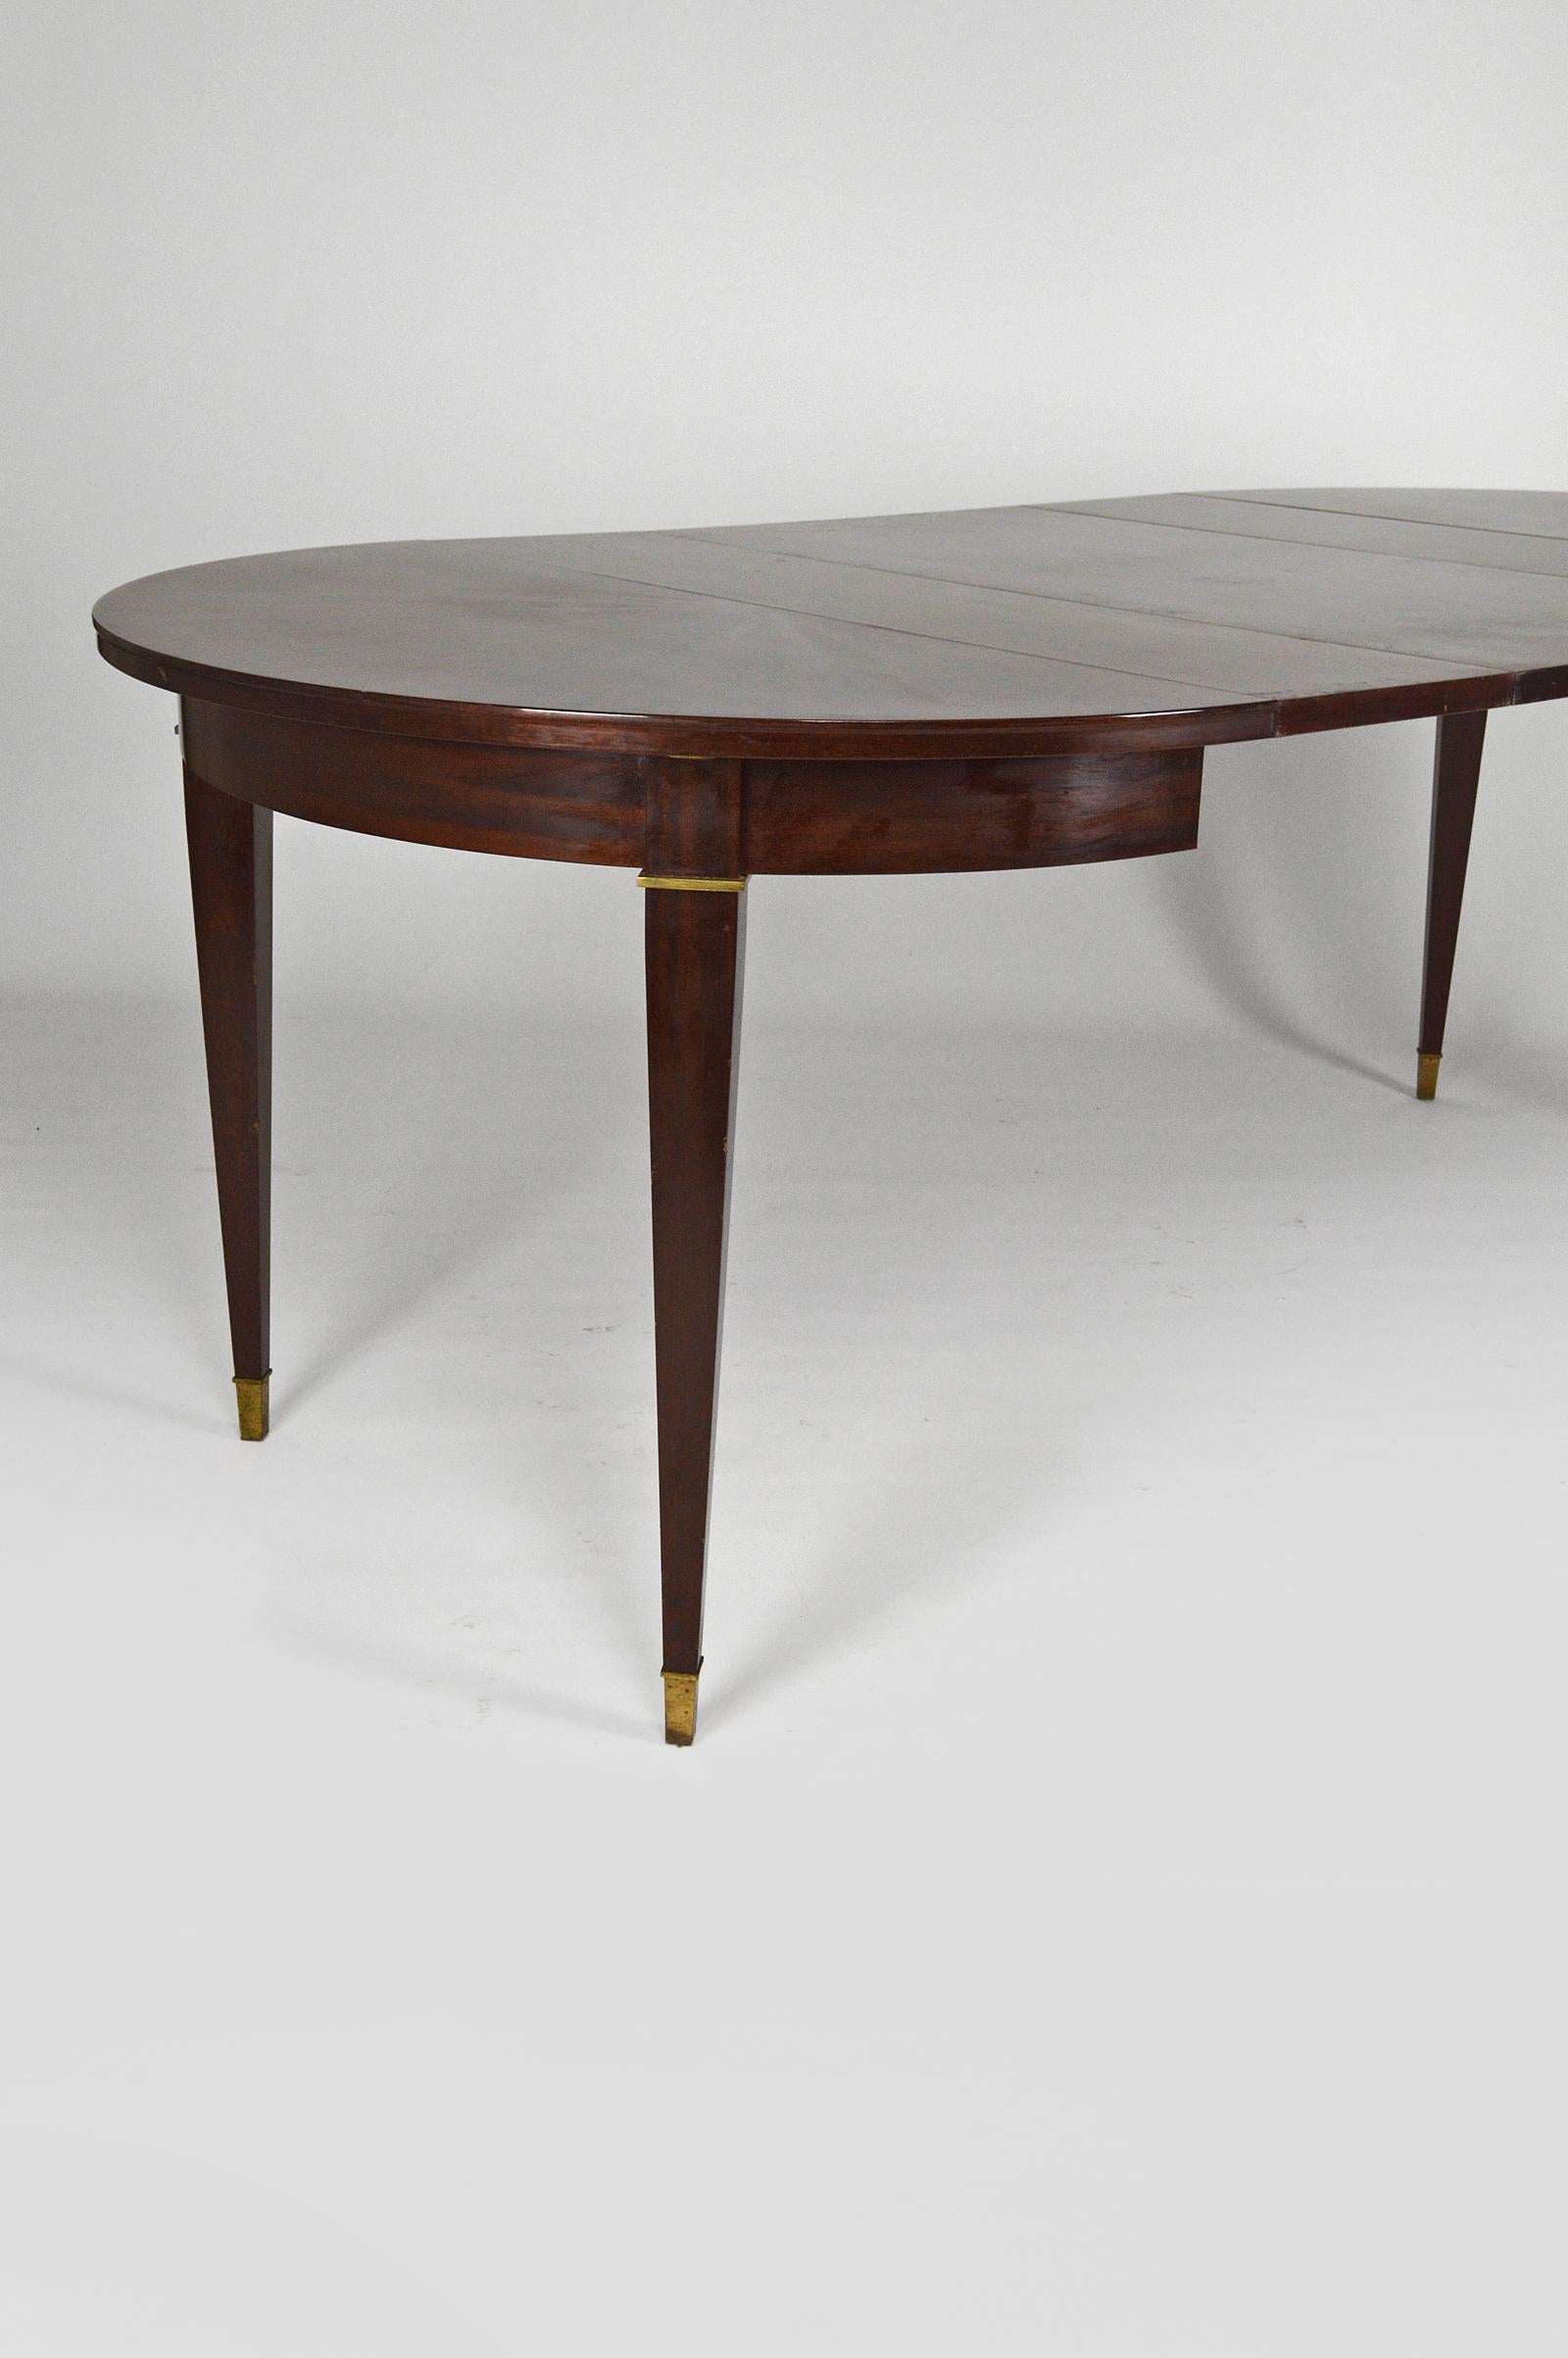 Art Deco Mahogany Round Table with Extensions, by Jacques Adnet, circa 1940 For Sale 5